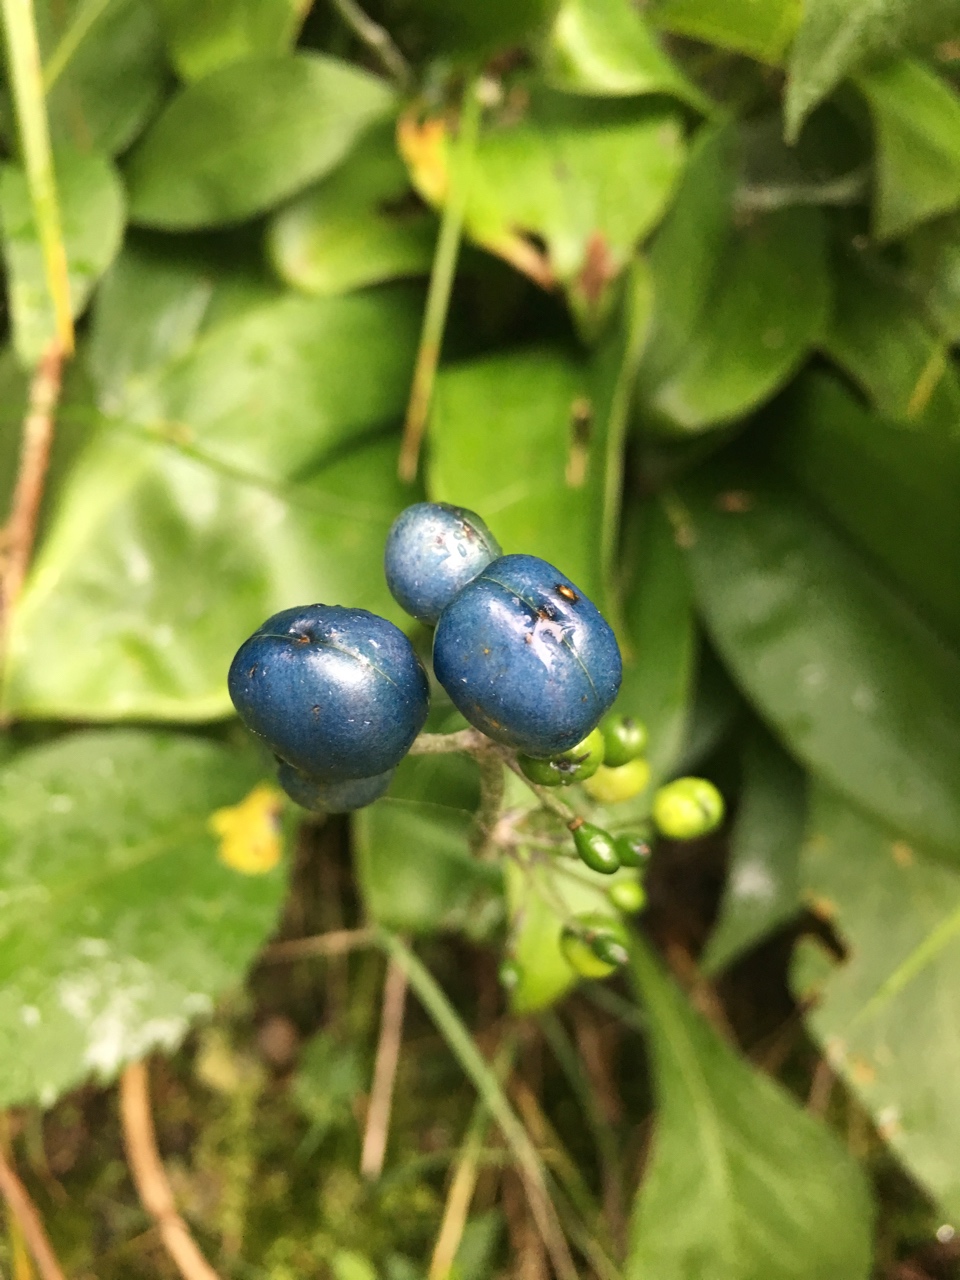 The Scientific Name is Clintonia borealis. You will likely hear them called Clinton's Lily, Yellow Clintonia, Bluebead Lily. This picture shows the Close-up of mature berries of Clintonia borealis